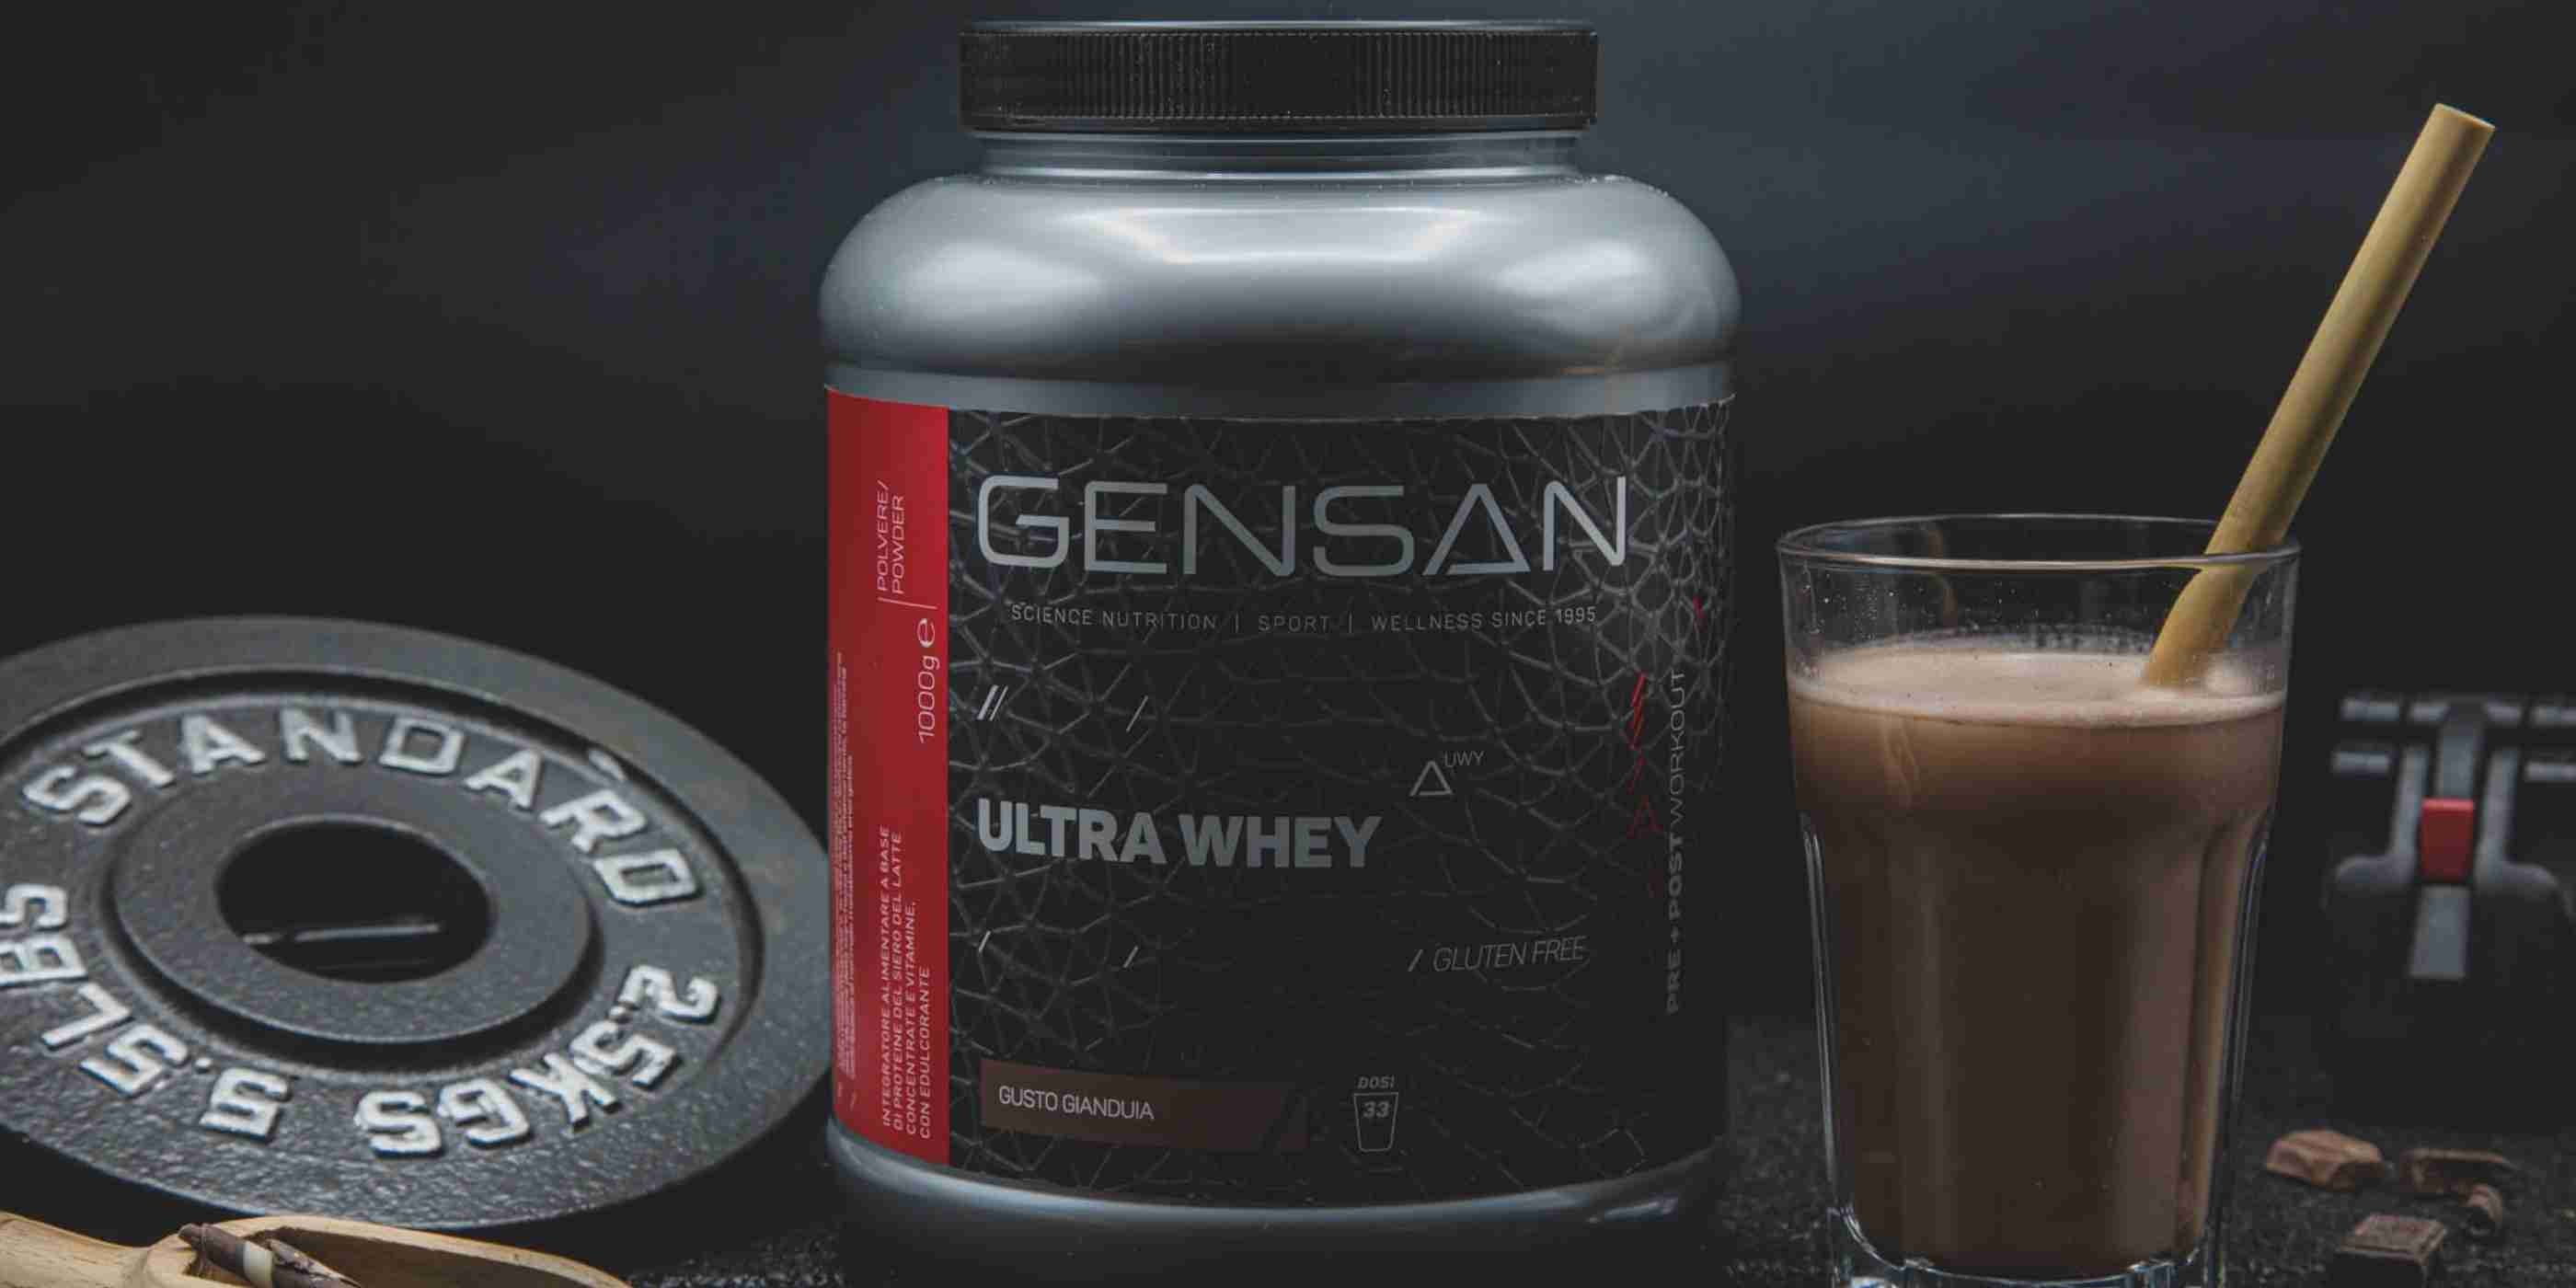 whey protein in polvere ULTRA WHEY gensan